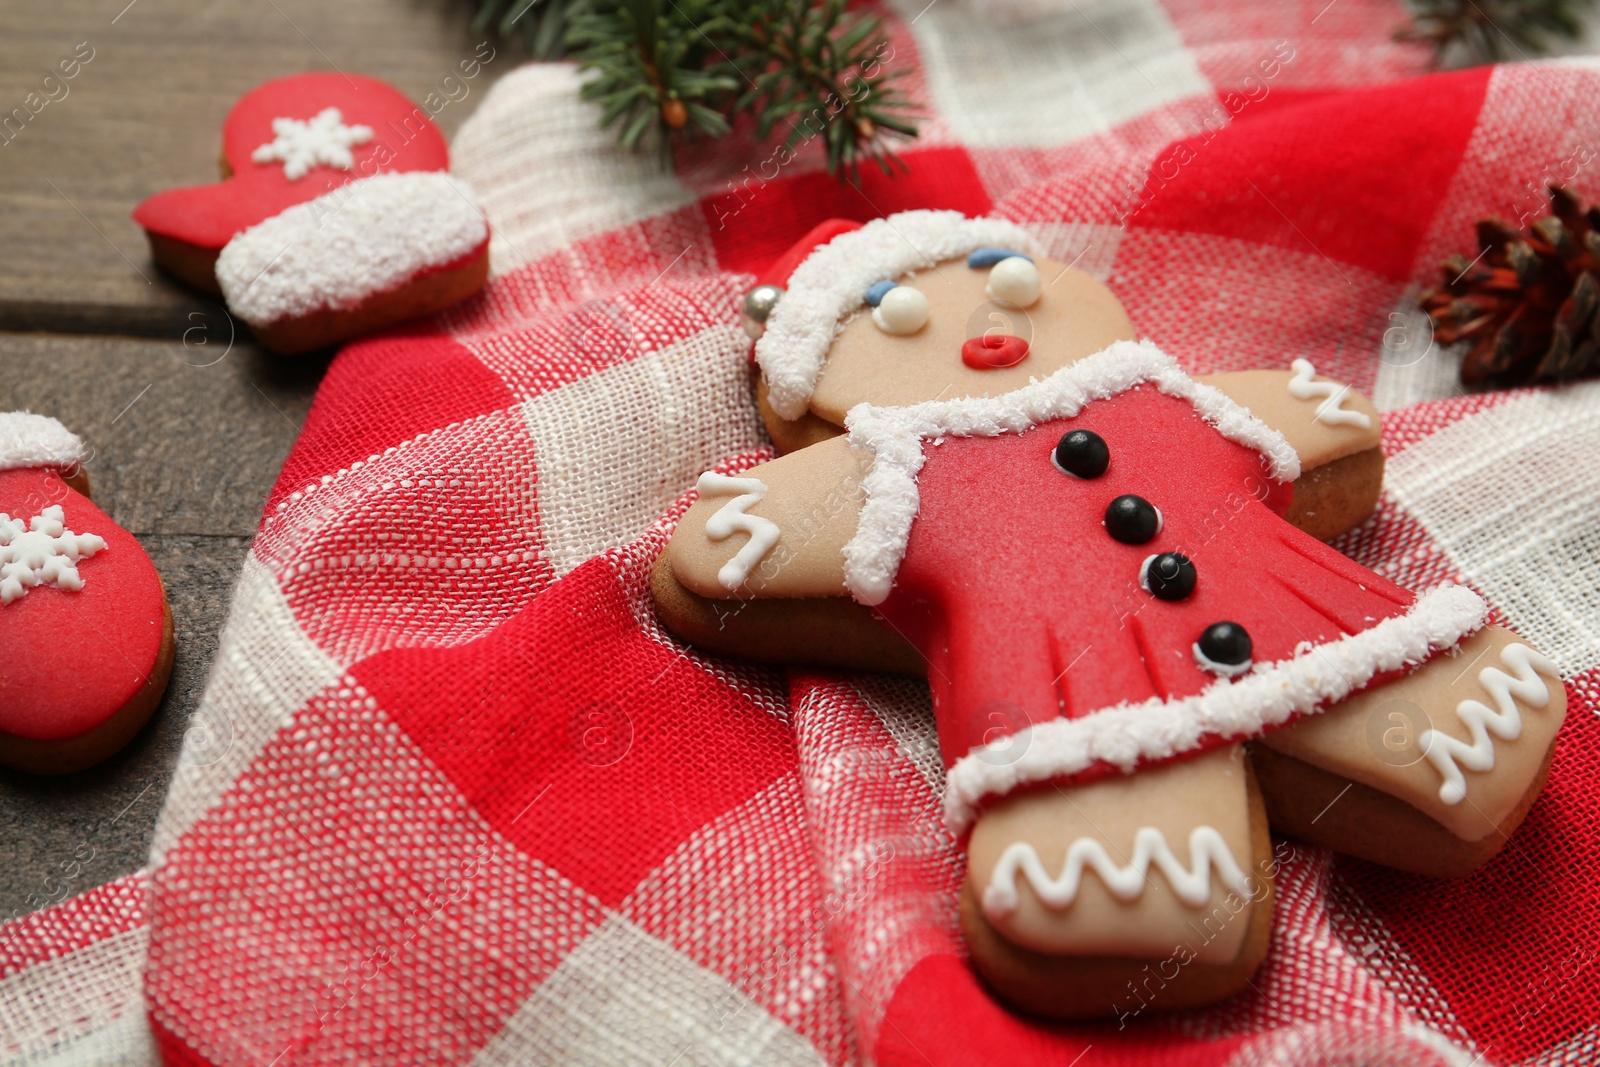 Photo of Delicious Christmas cookies on wooden table, closeup